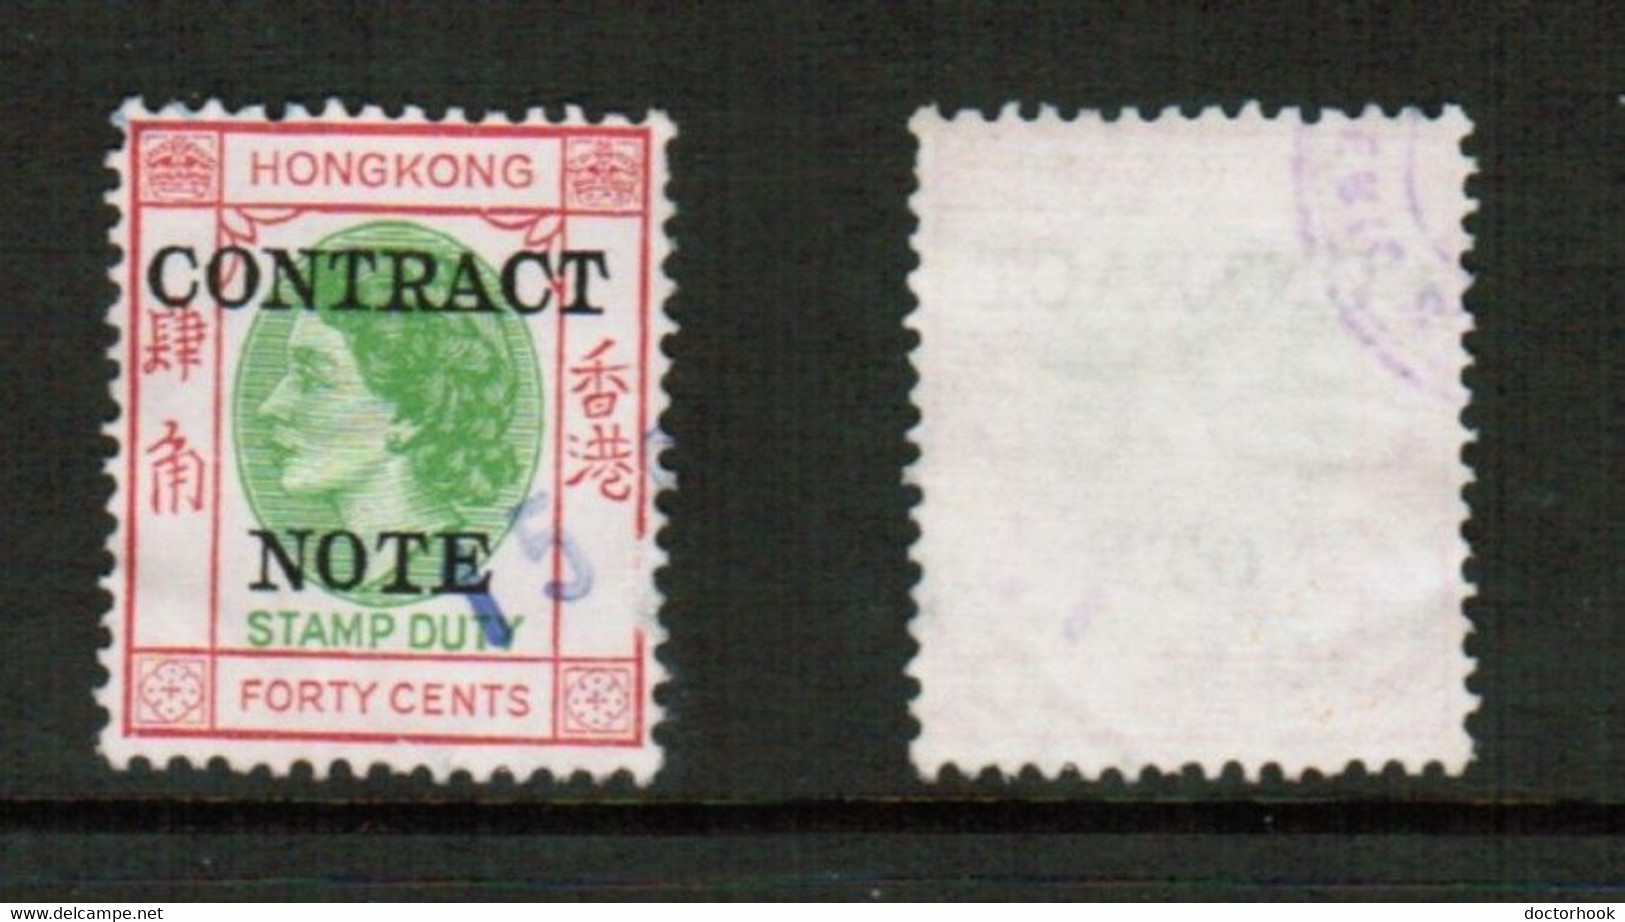 HONG KONG   40 CENT CONTRACT NOTE FISCAL USED THIN (CONDITION AS PER SCAN) (Stamp Scan # 828-10) - Timbres Fiscaux-postaux